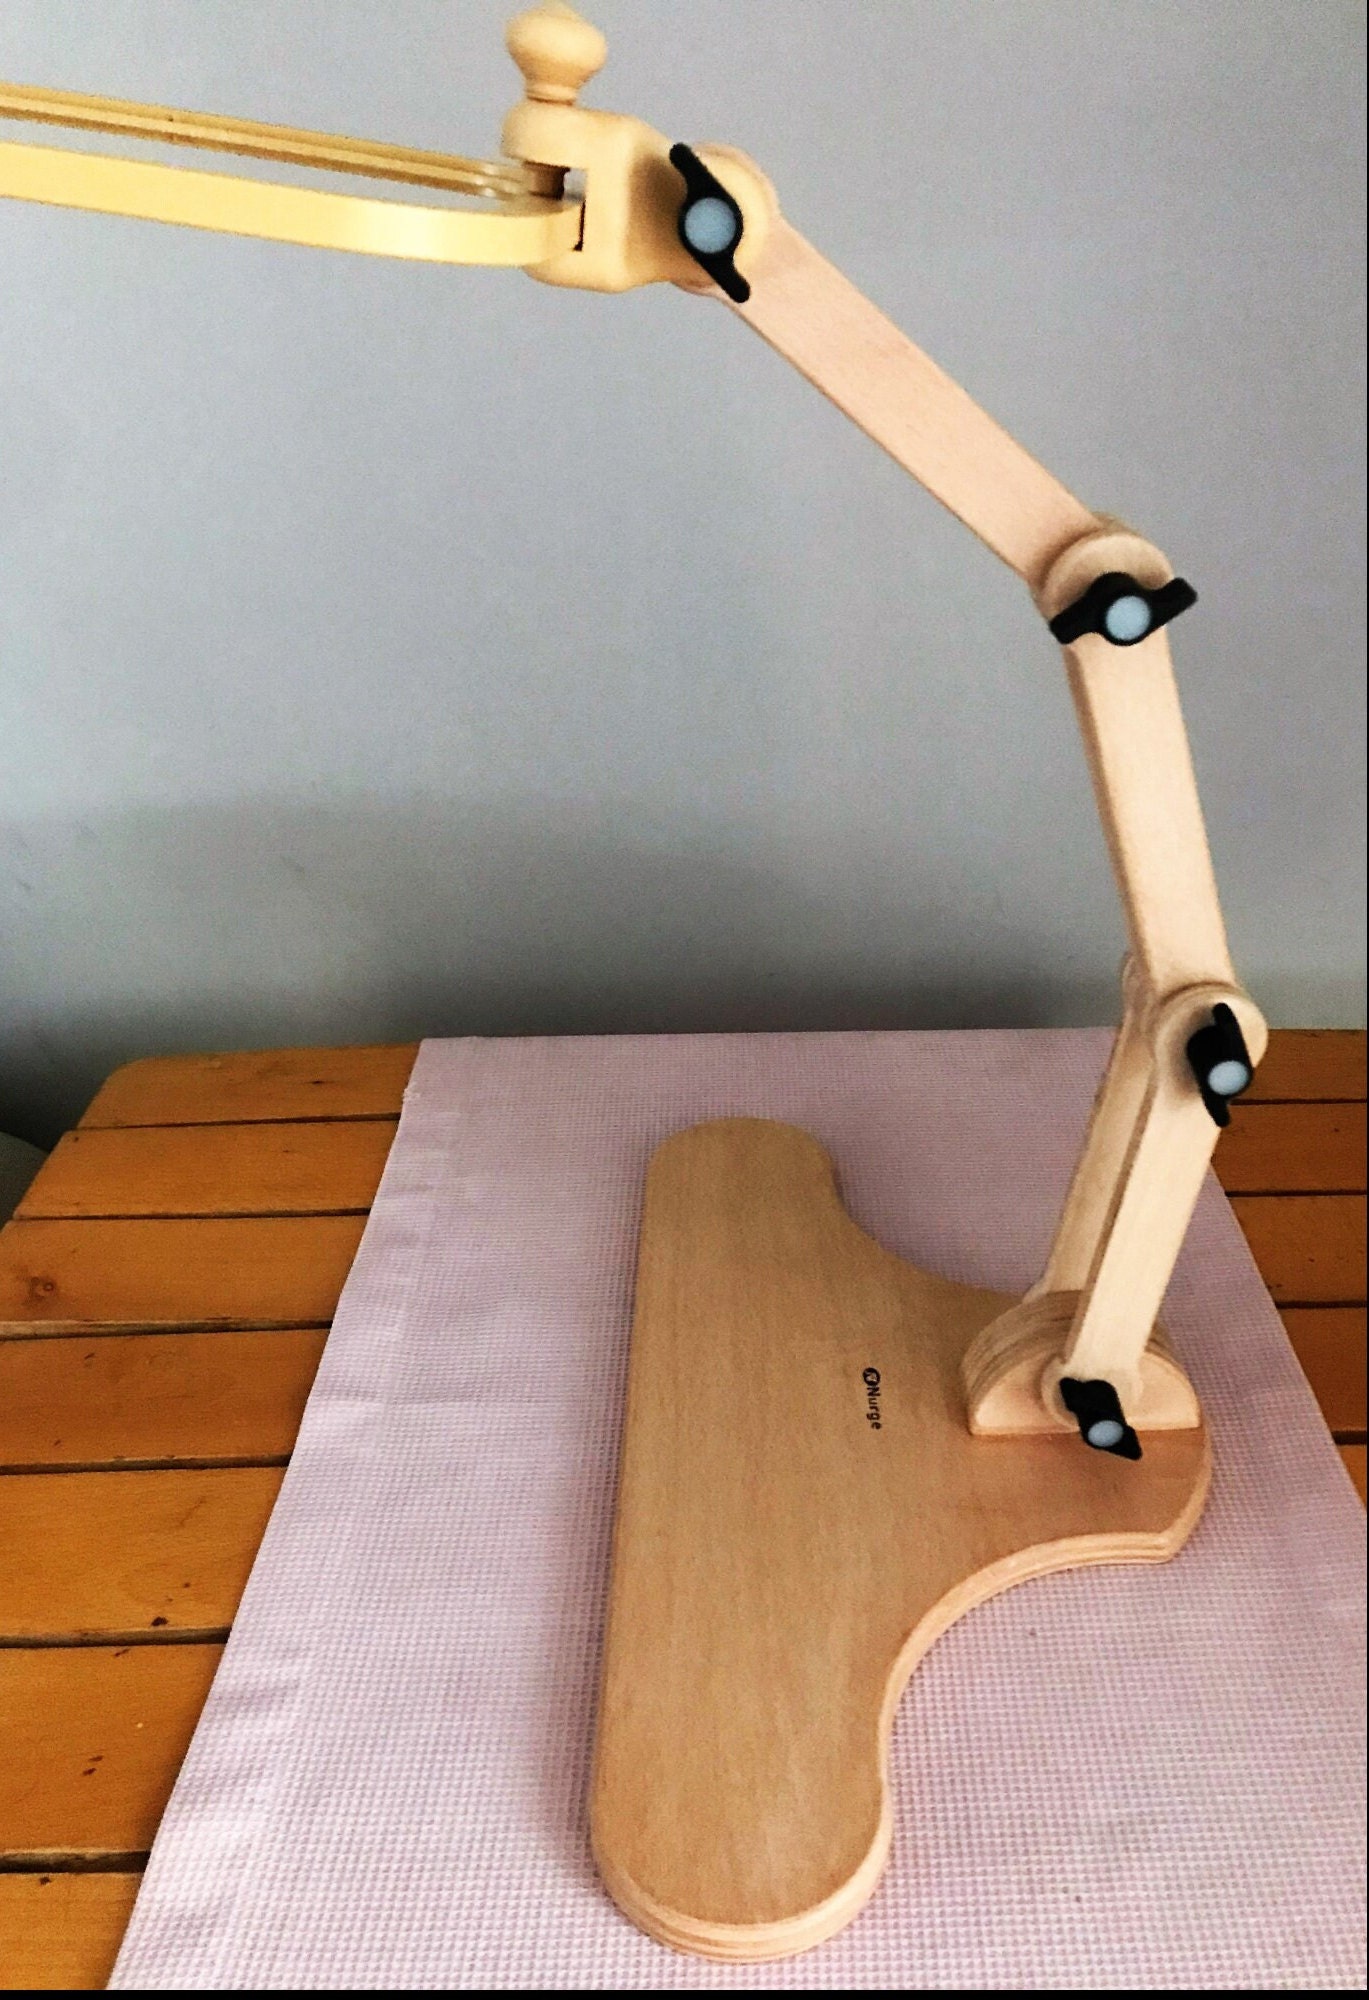 Flexible Embroidery Hoop Table Seat Stand